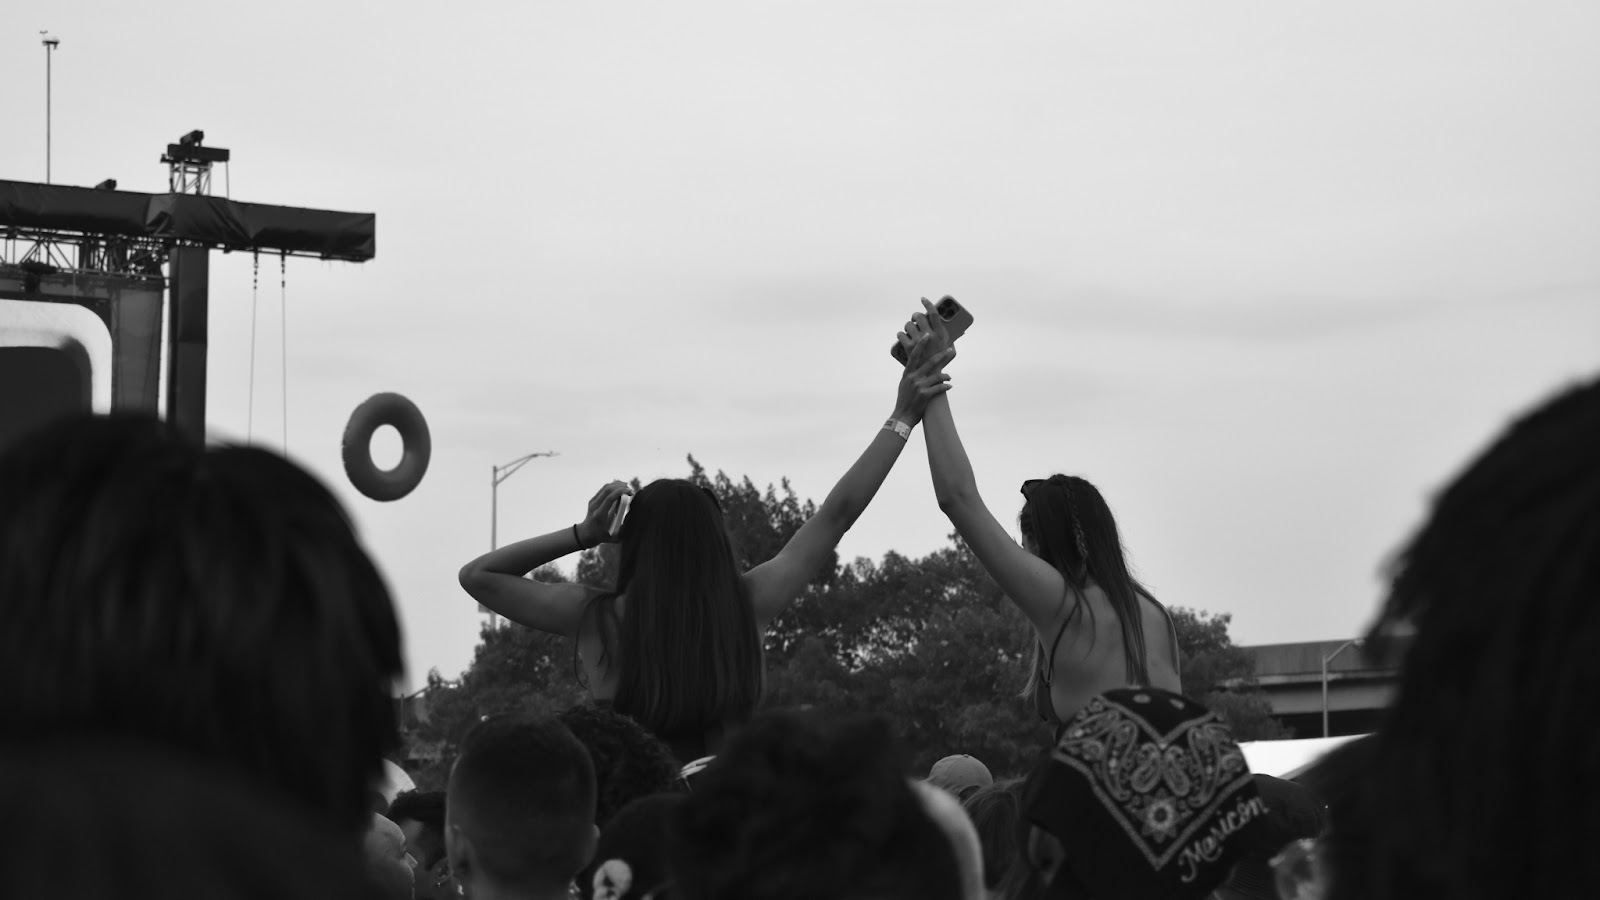 Two festival goers amidst a crowd hold hands raised above their heads whilst sitting atop friend’s shoulders. Their backs are turned to the camera as they face the main stage. The festival wristband is visible on one of their wrists.